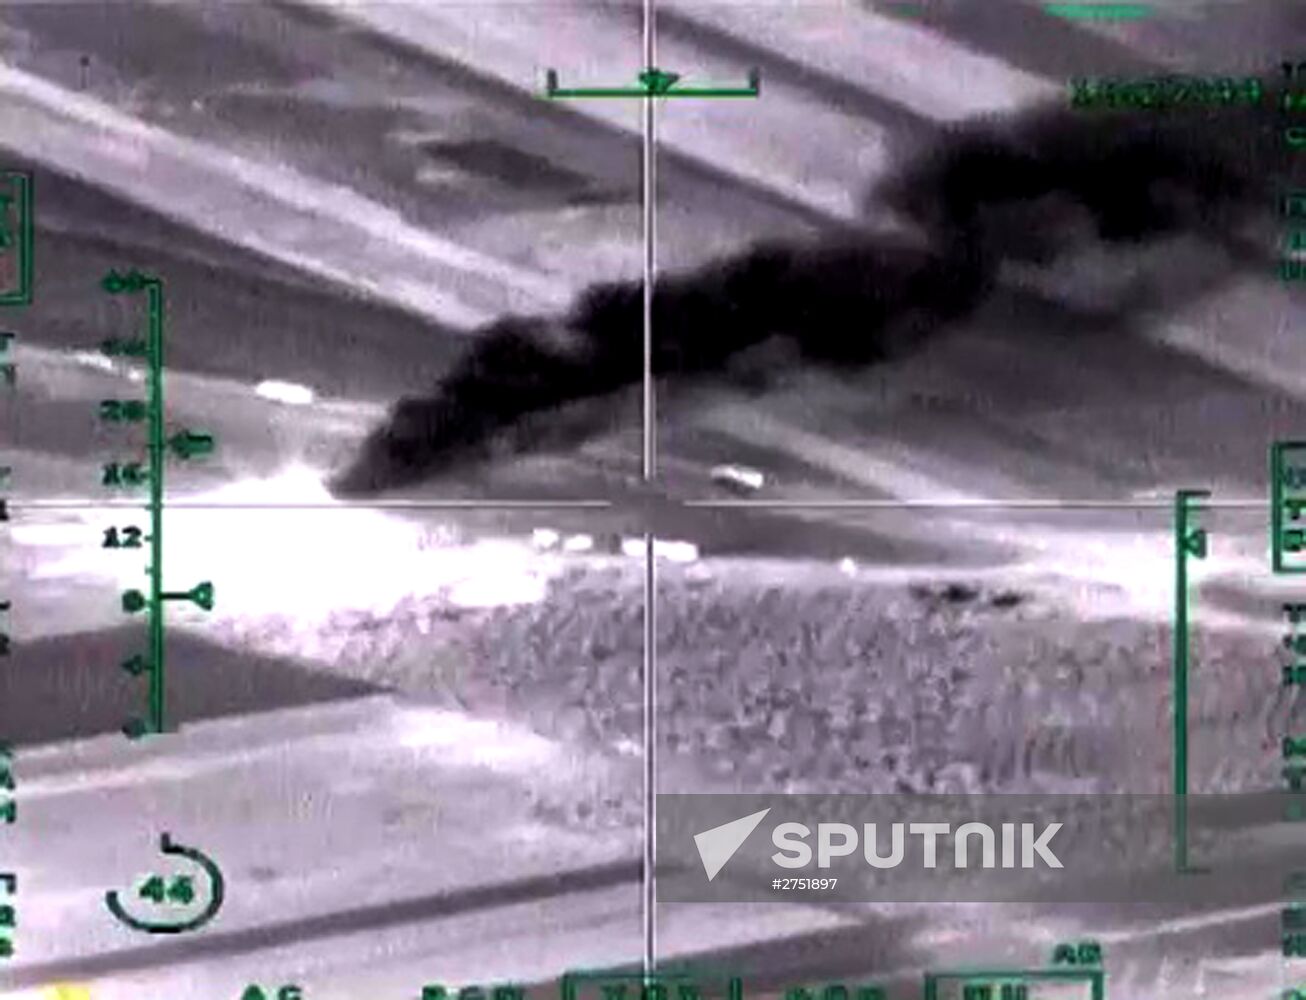 Russian Aerospace Forces airstrike oil trucks in Syrian province Aleppo